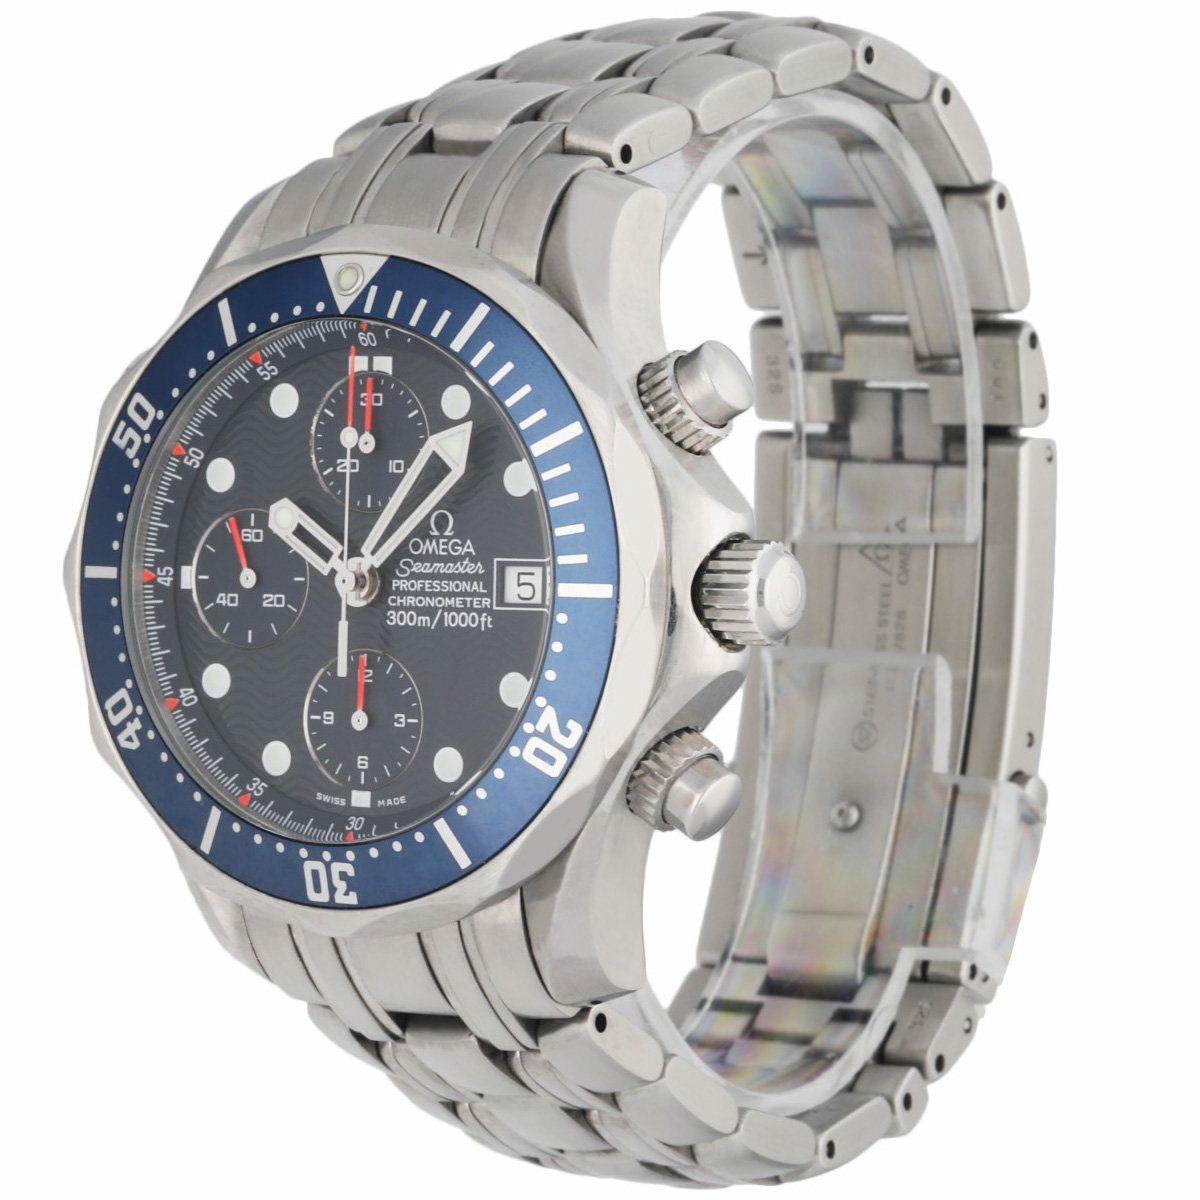 Omega Seamaster professional 2298.80.00 men's watch. 42mm titanium case with titanium unidirectional rotating bezel with blue bezel insert. Blue wave dial with luminous steel hands and dot hour markers. Date display at the 3 o'clock position. Three